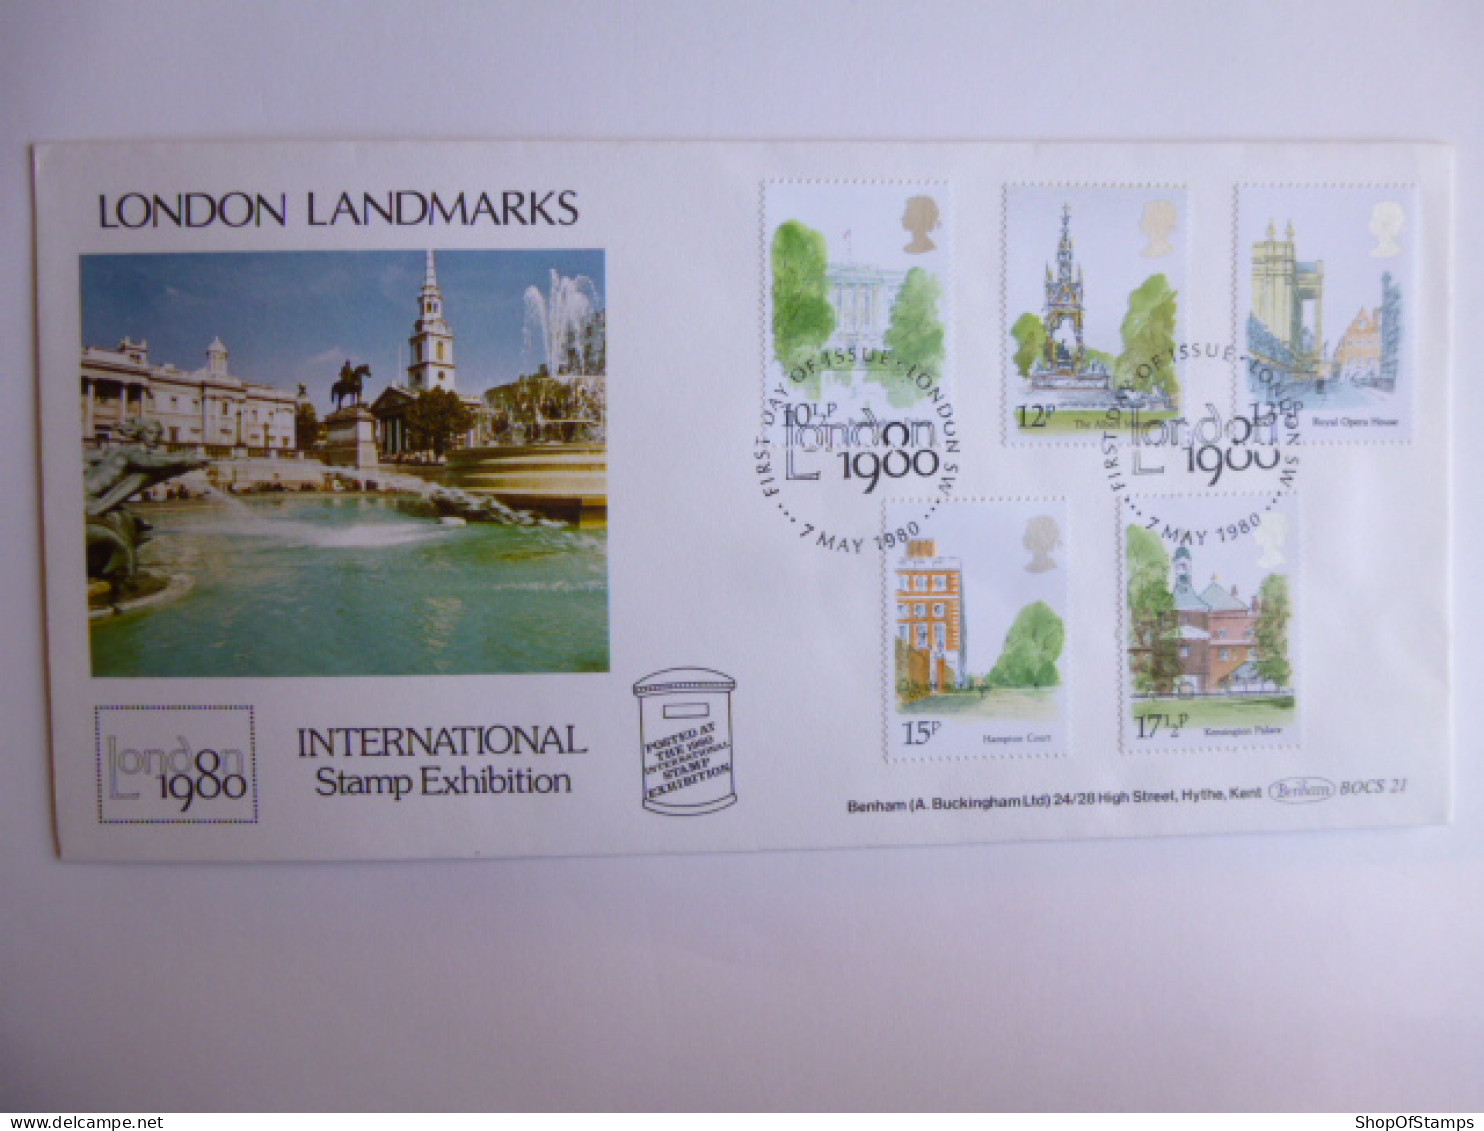 GREAT BRITAIN SG 1120-24 LONDON LANDMARKS   FDC POSTED AT POST OFFICE EXHIBITION POSTMARK - Unclassified